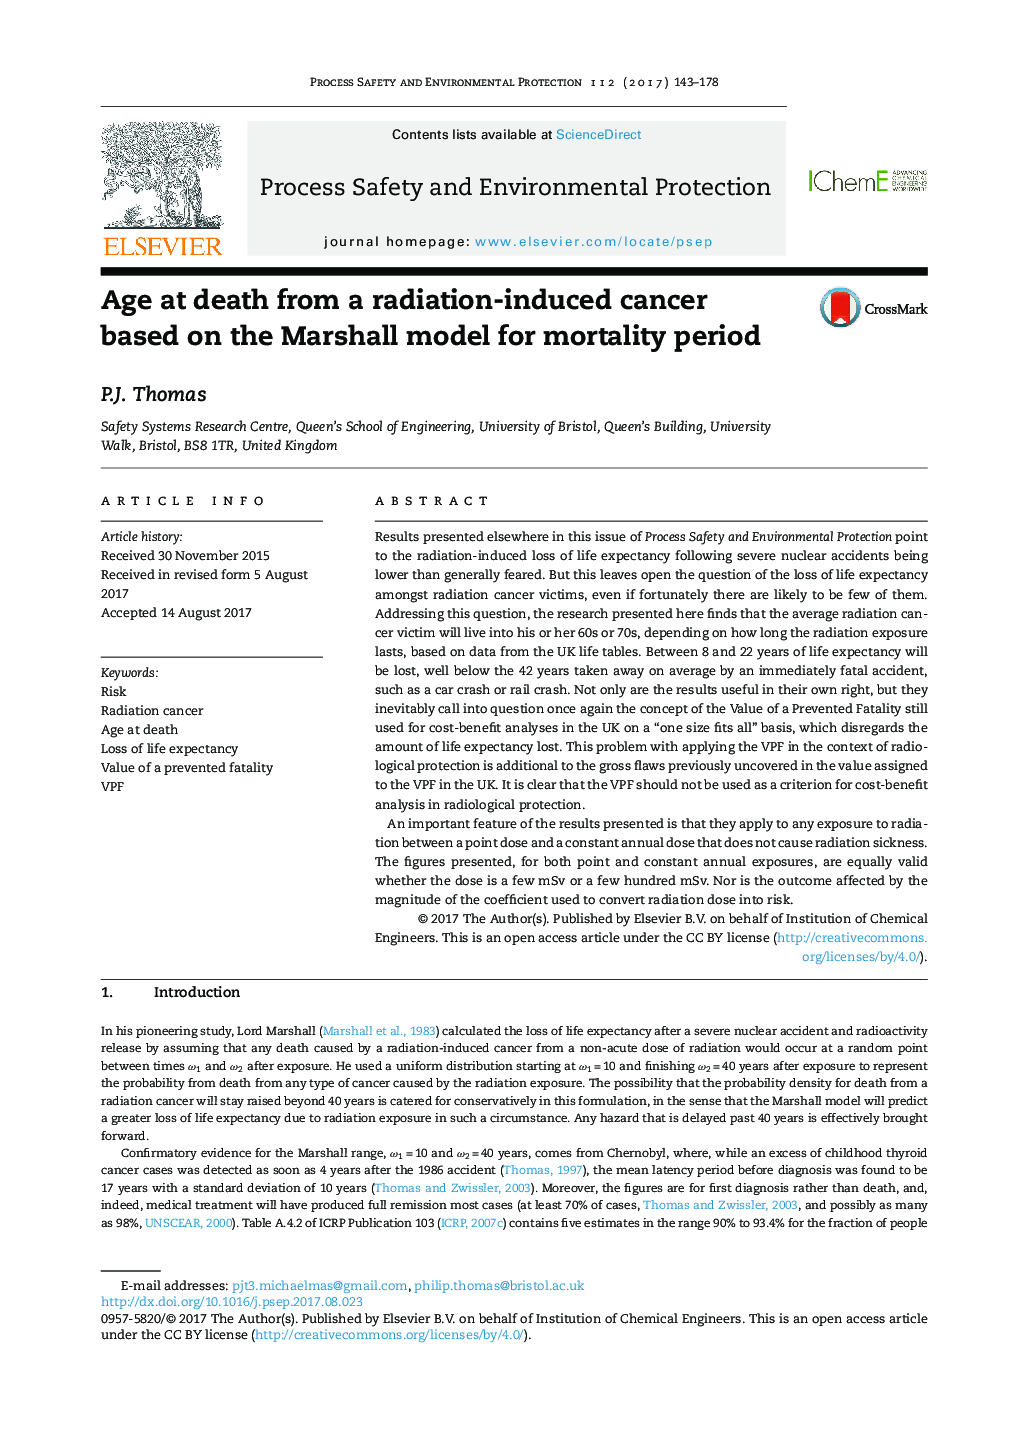 Age at death from a radiation-induced cancer based on the Marshall model for mortality period